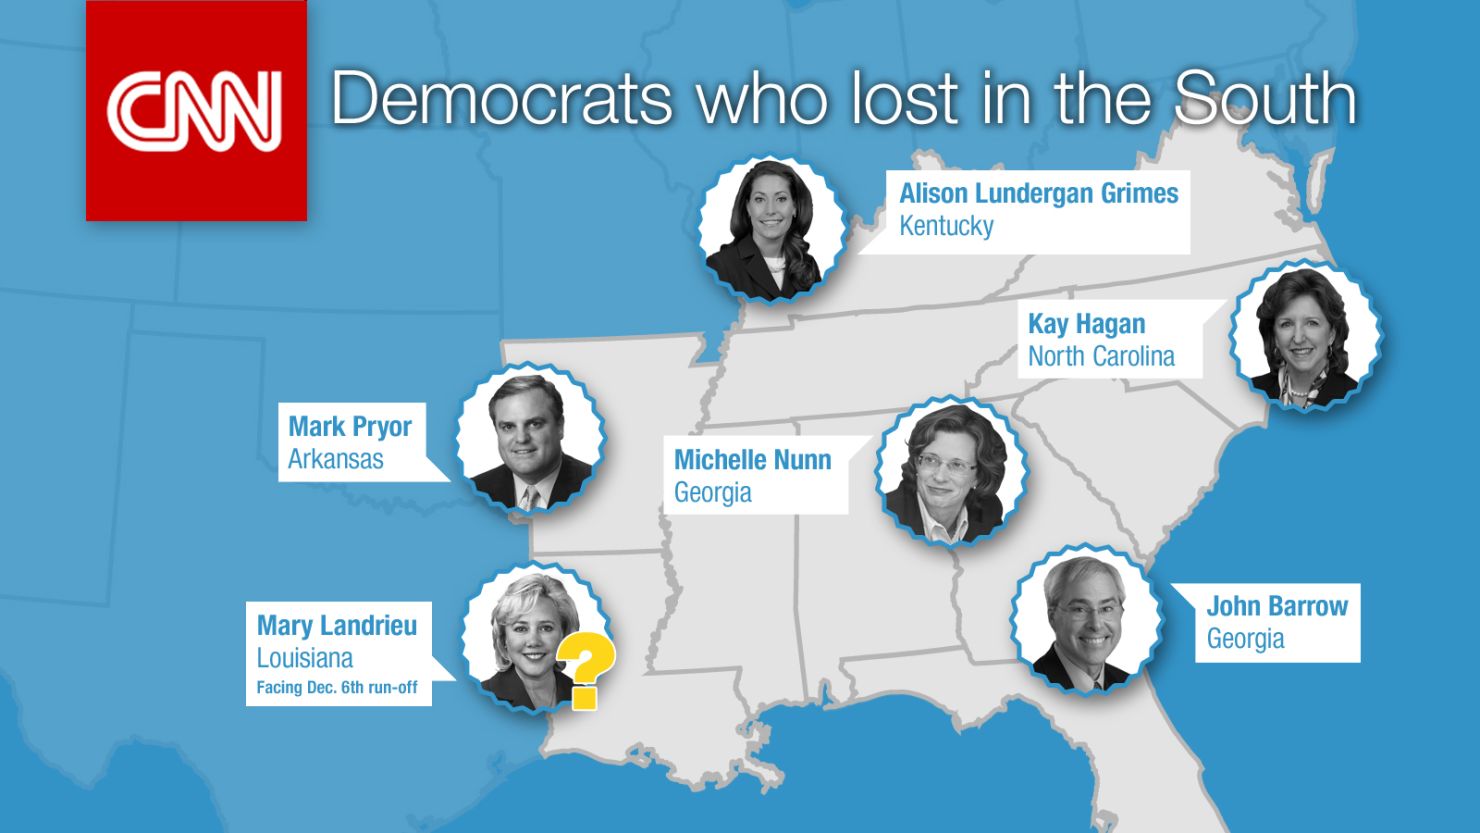 Southern Democrats who lost key races this election cycle